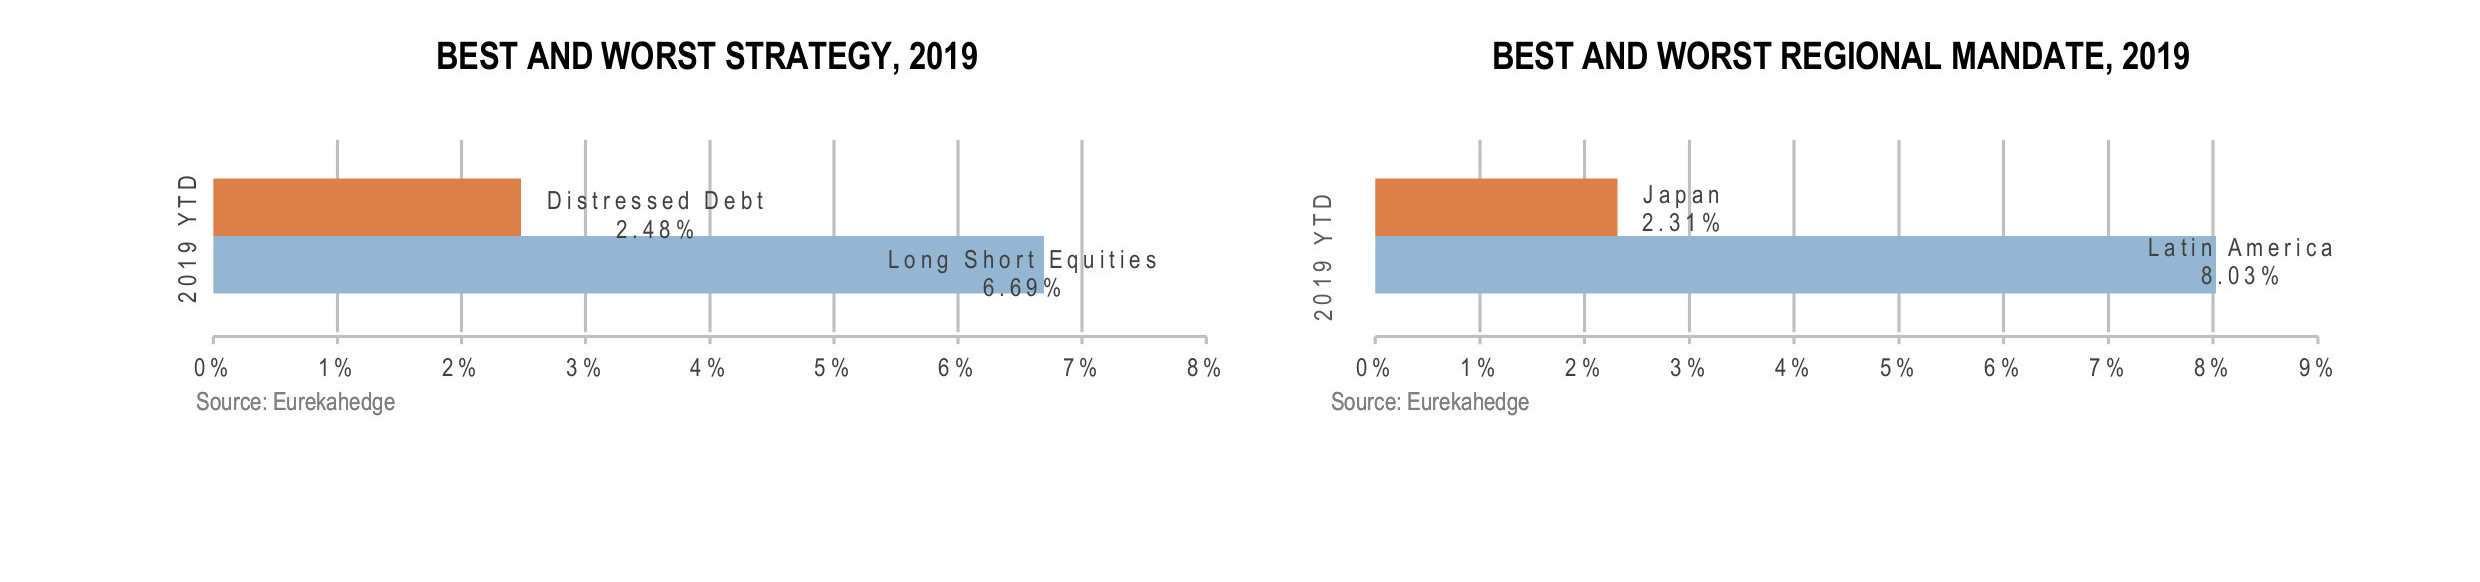 Global Hedge Funds Infographic August 2019 - best and worst strategy and regional mandate 2019